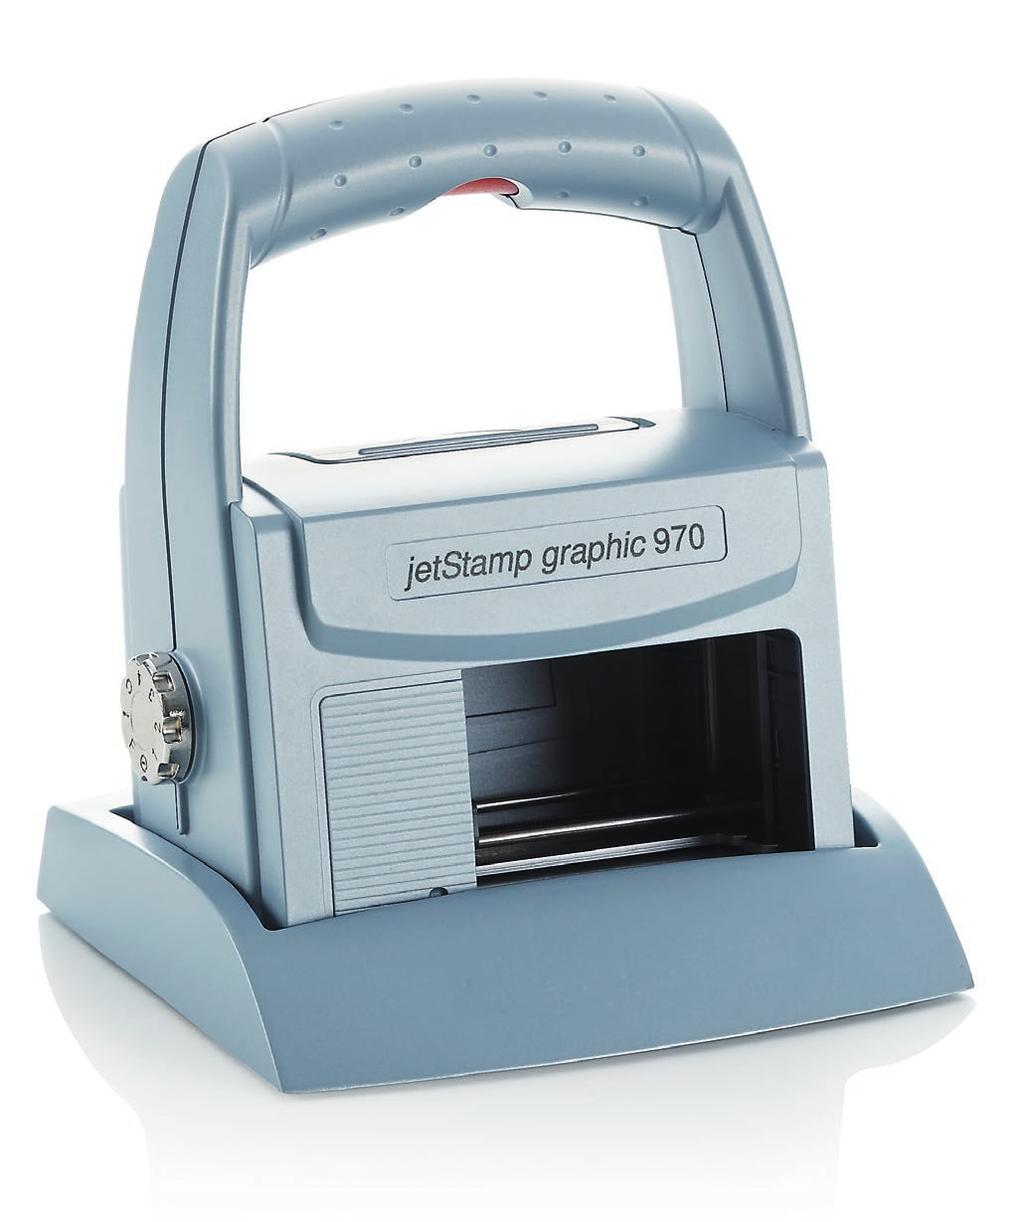 Hand-Held Inkjet Stamp jetstamp graphic 970 The universal talent... The jetstamp graphic 970 is a mobile hand-held inkjet printer that marks documents and or products simply and quickly.